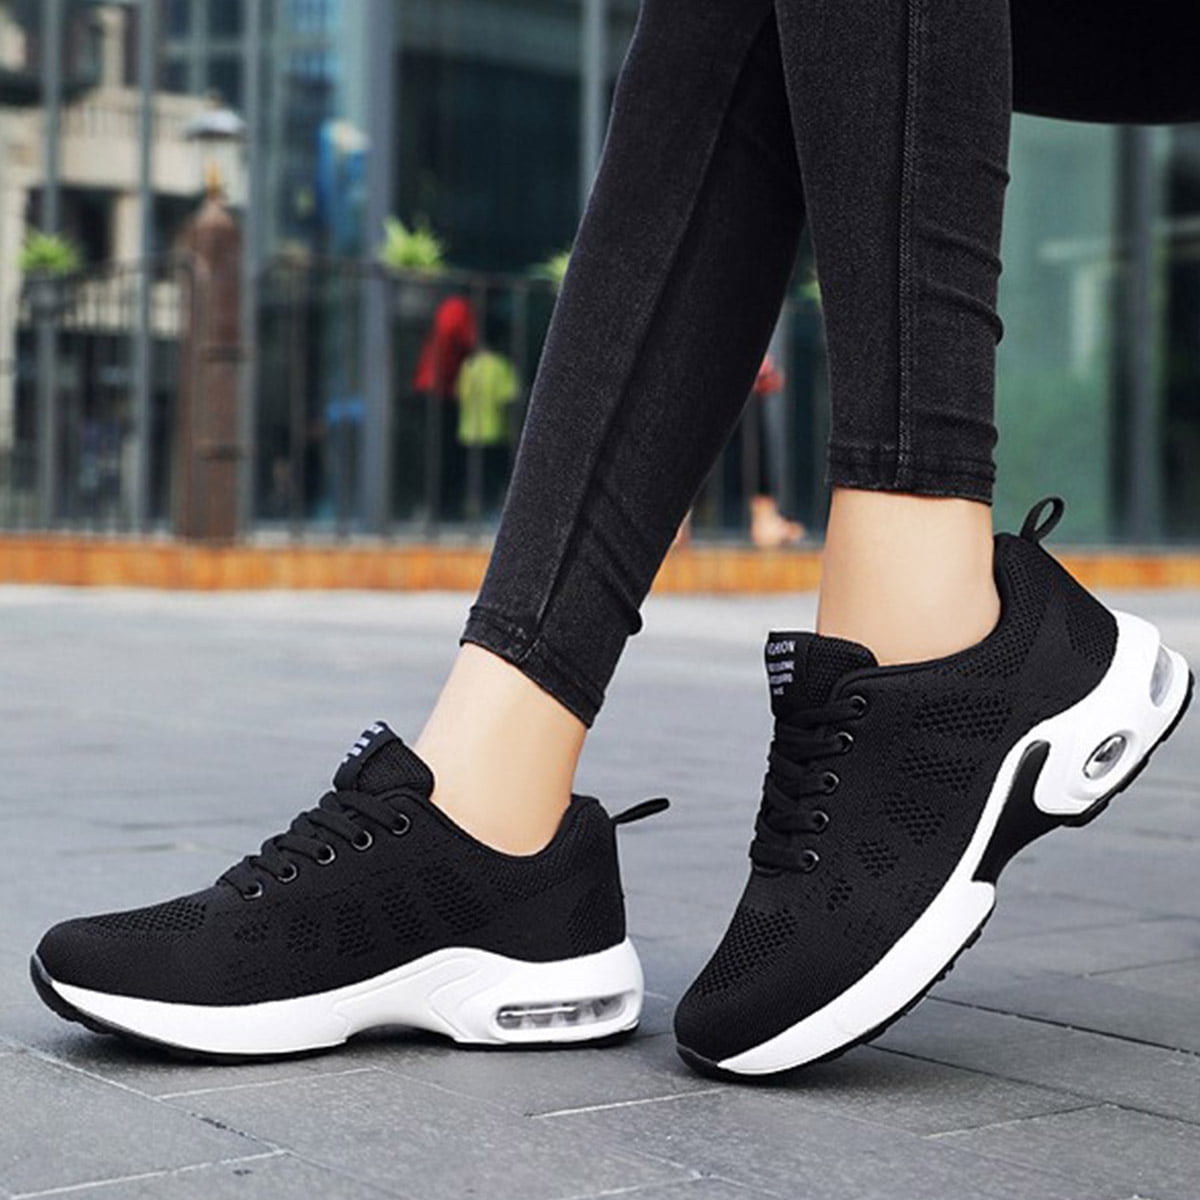 Women Lightweight Breathable Mesh Walking Shoes Casual Sports Athletic Sneakers 